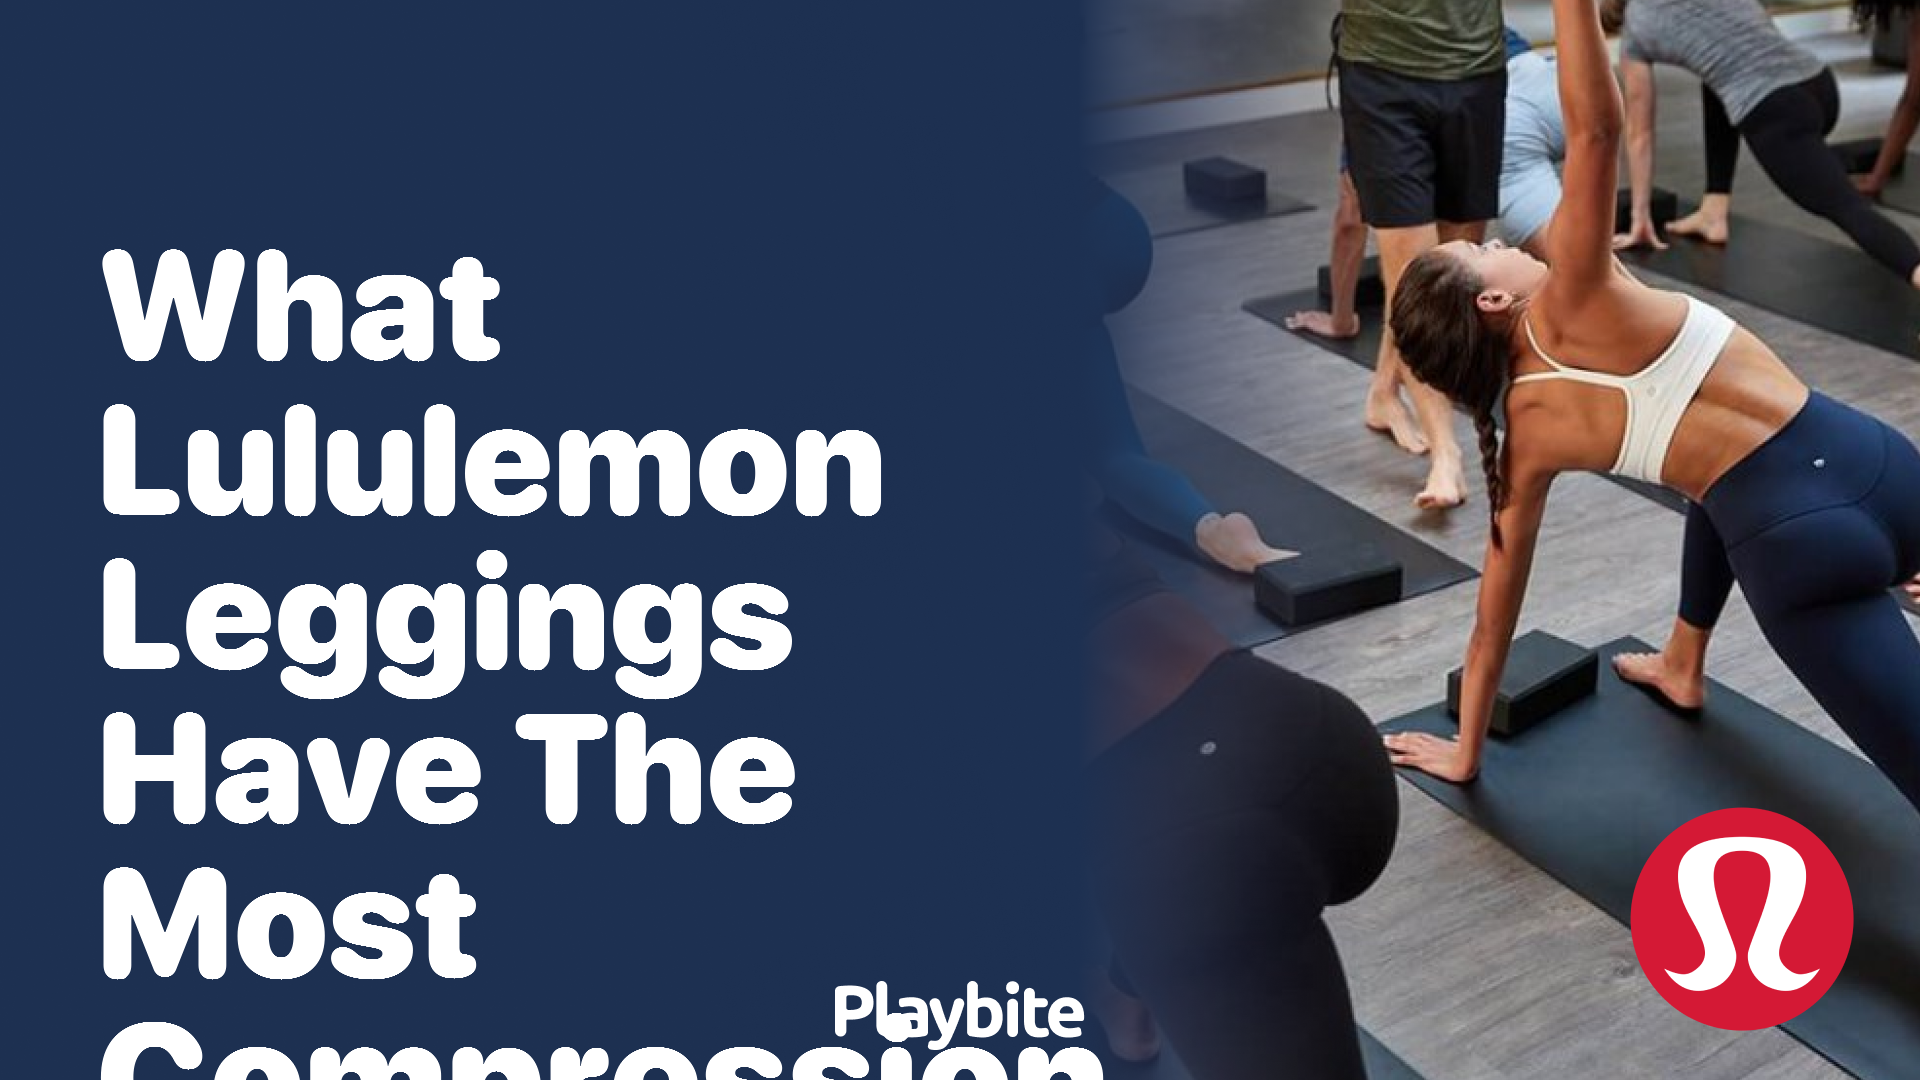 Which Lululemon Leggings Aren't See Through? Find Out Here! - Playbite